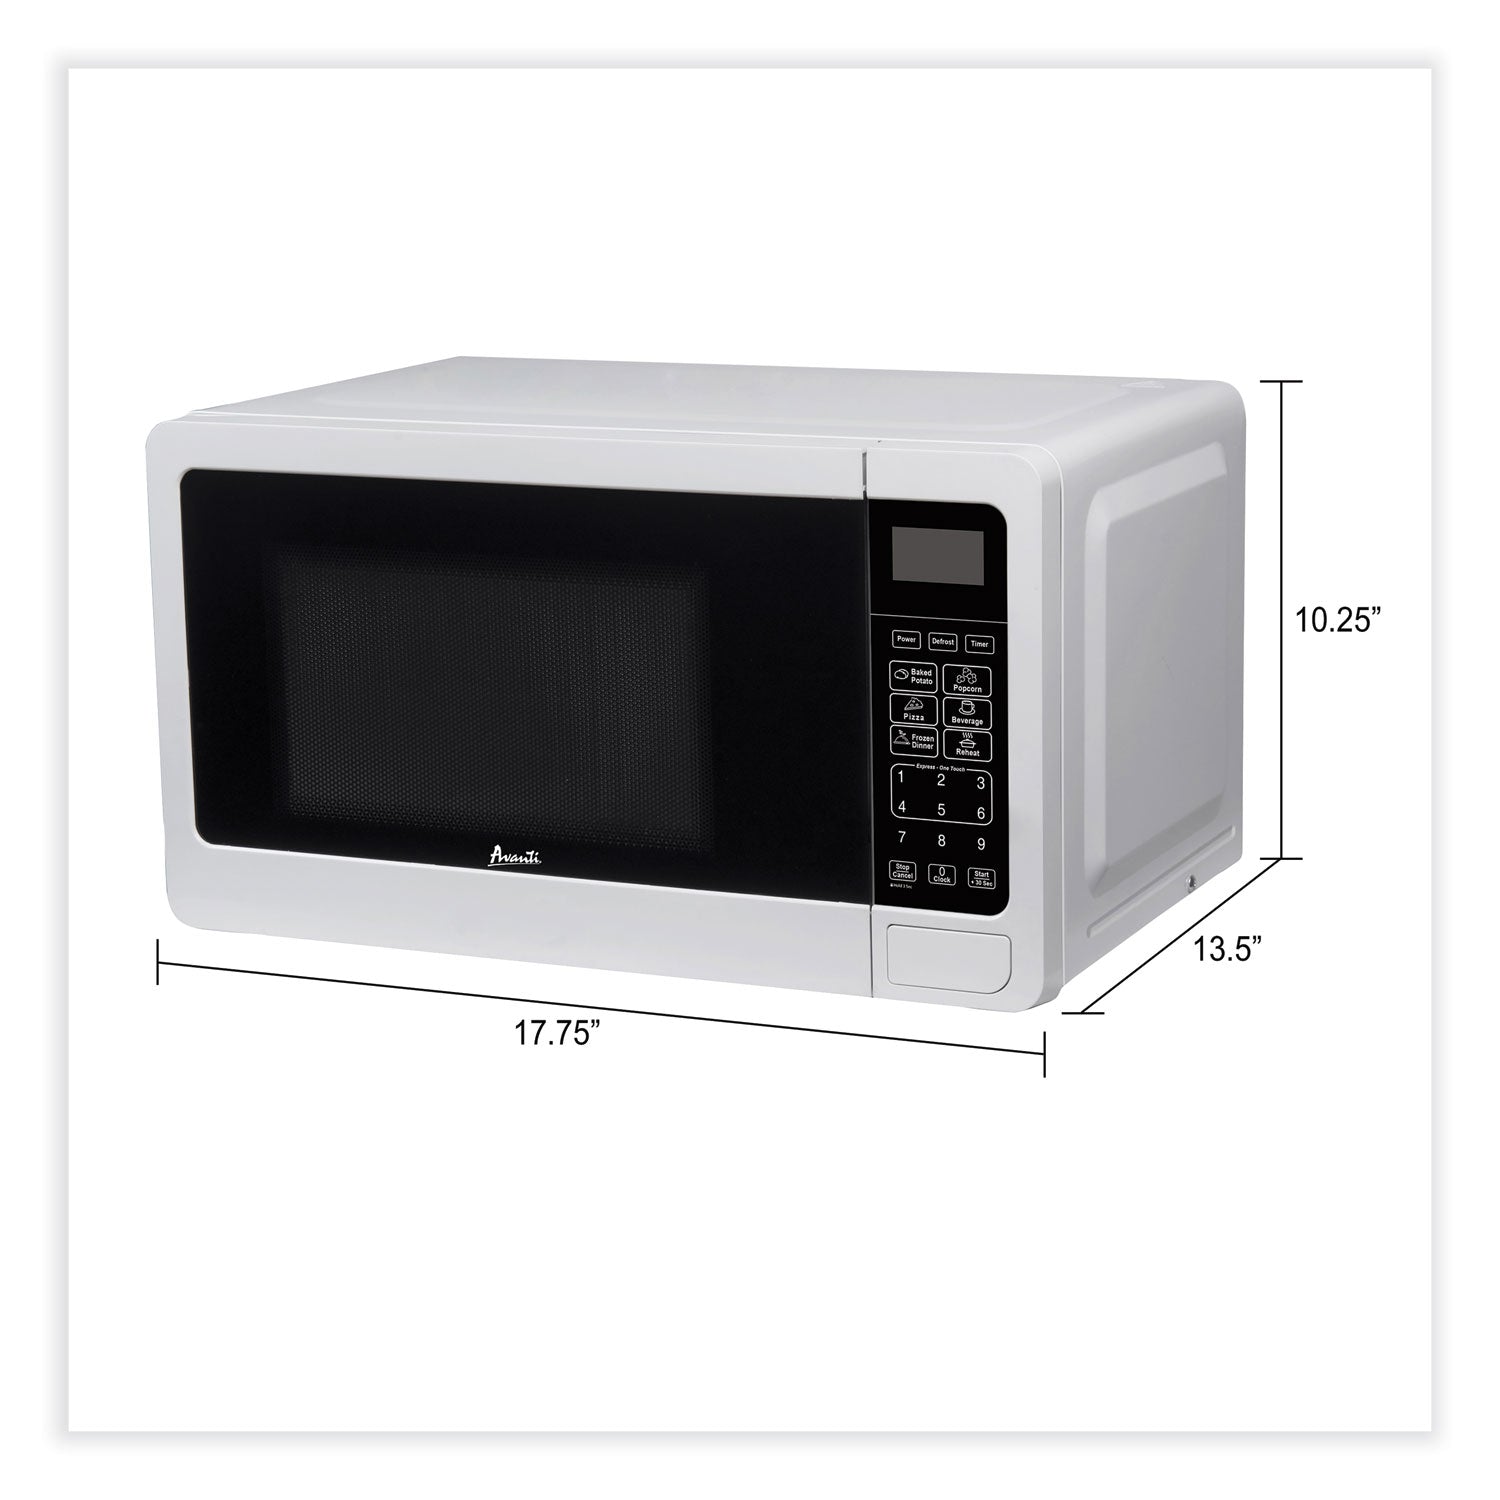 07-cu-ft-microwave-oven-700-watts-white_avamt7v0w - 2